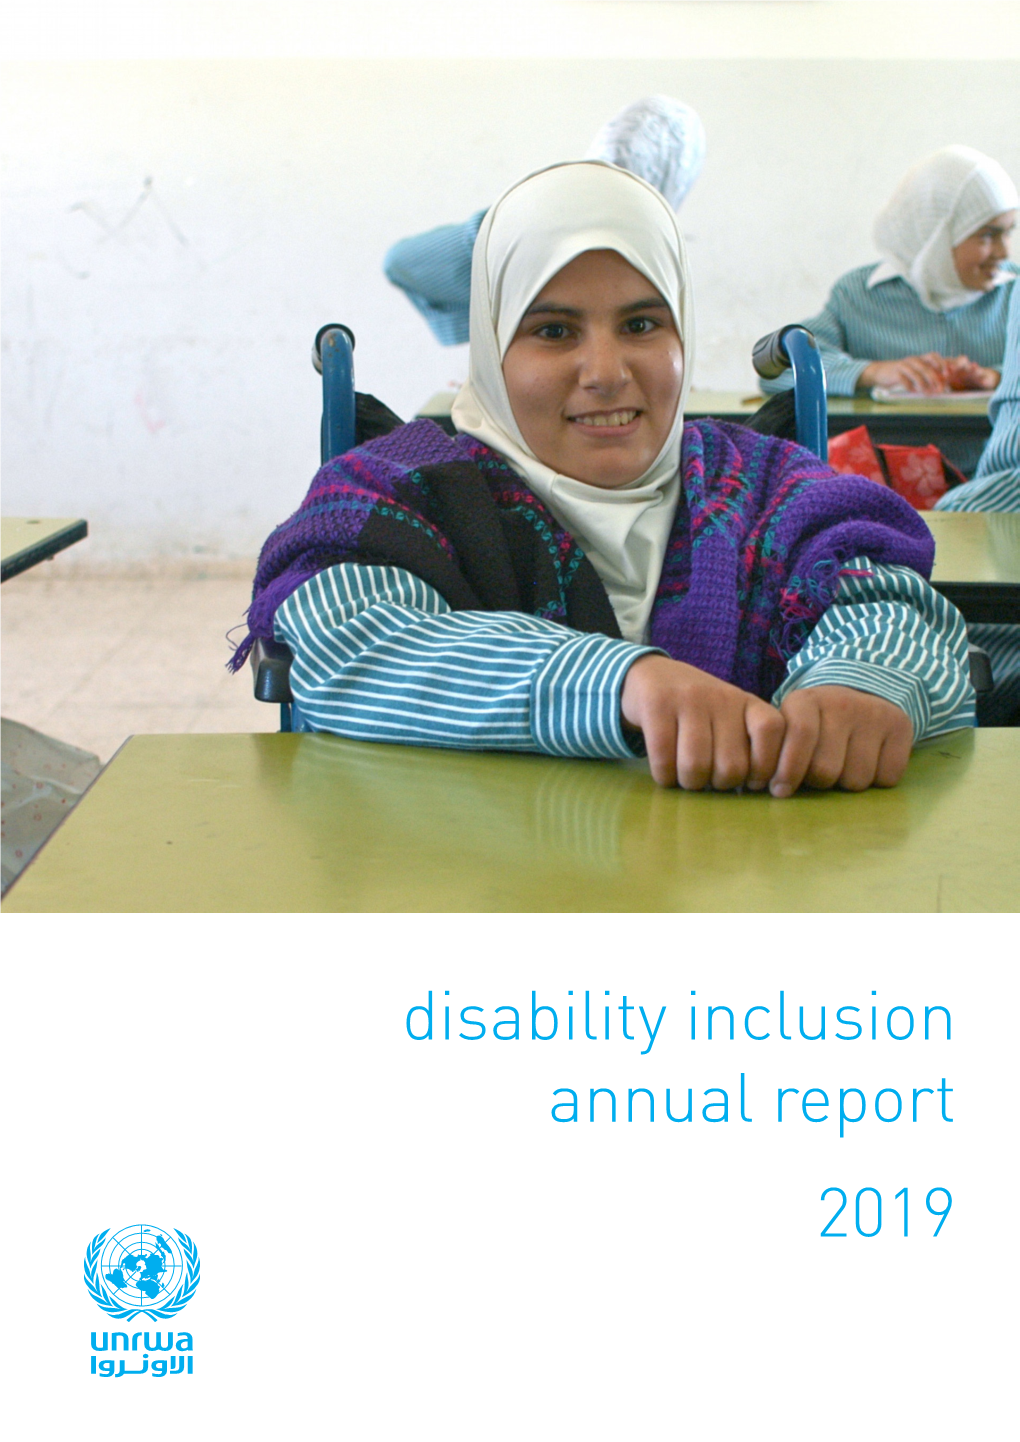 Disability Inclusion Annual Report 2019 2 Disability Inclusion Annual Report 2019 United Nations Relief and Works Agency 3